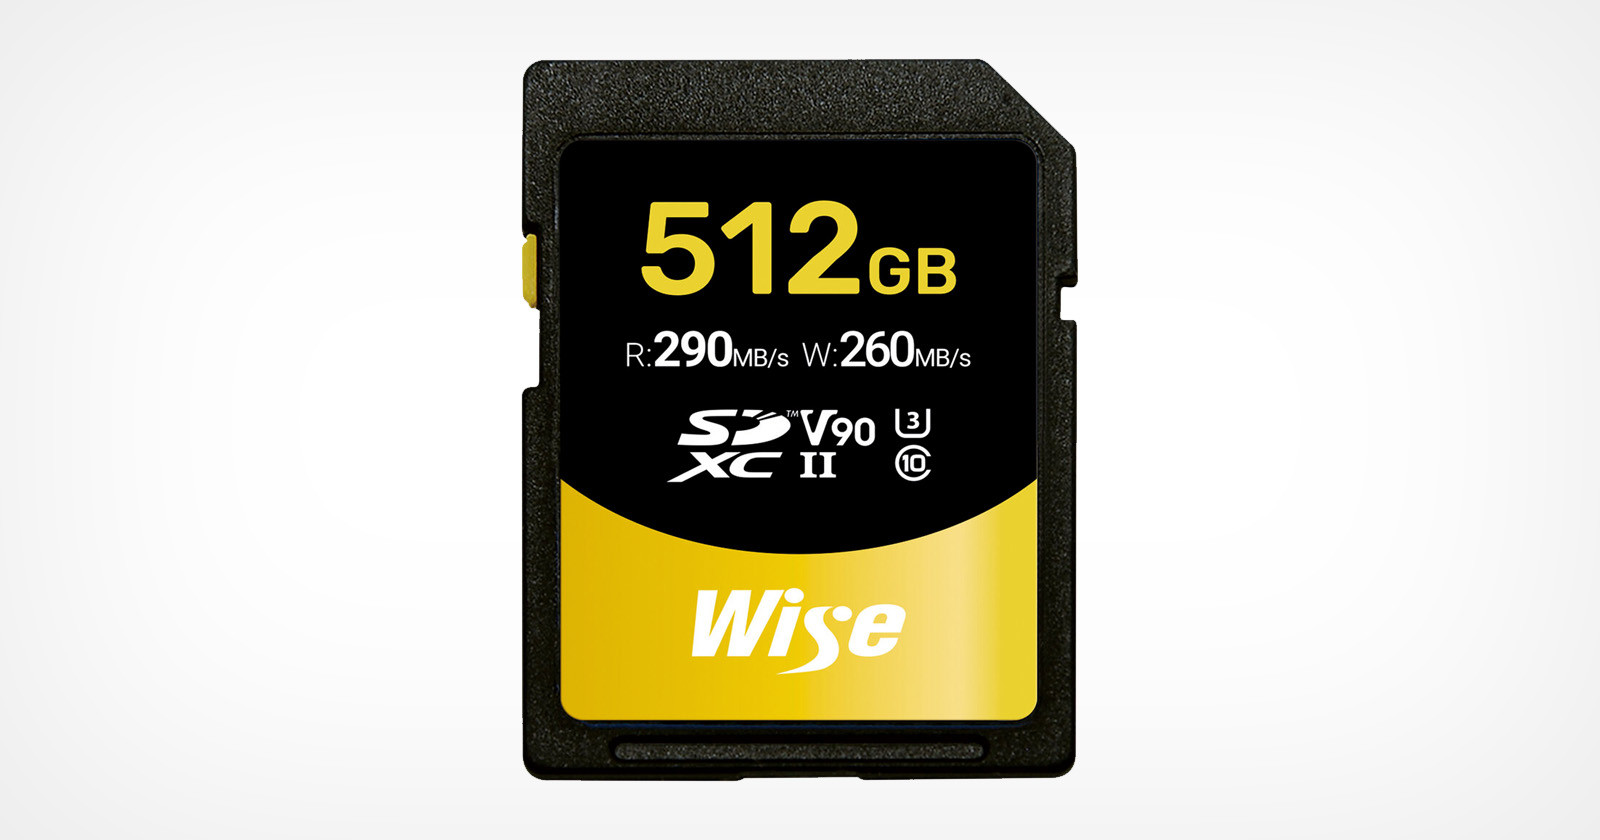  wise introduces world first 512gb v90 uhs-ii card 